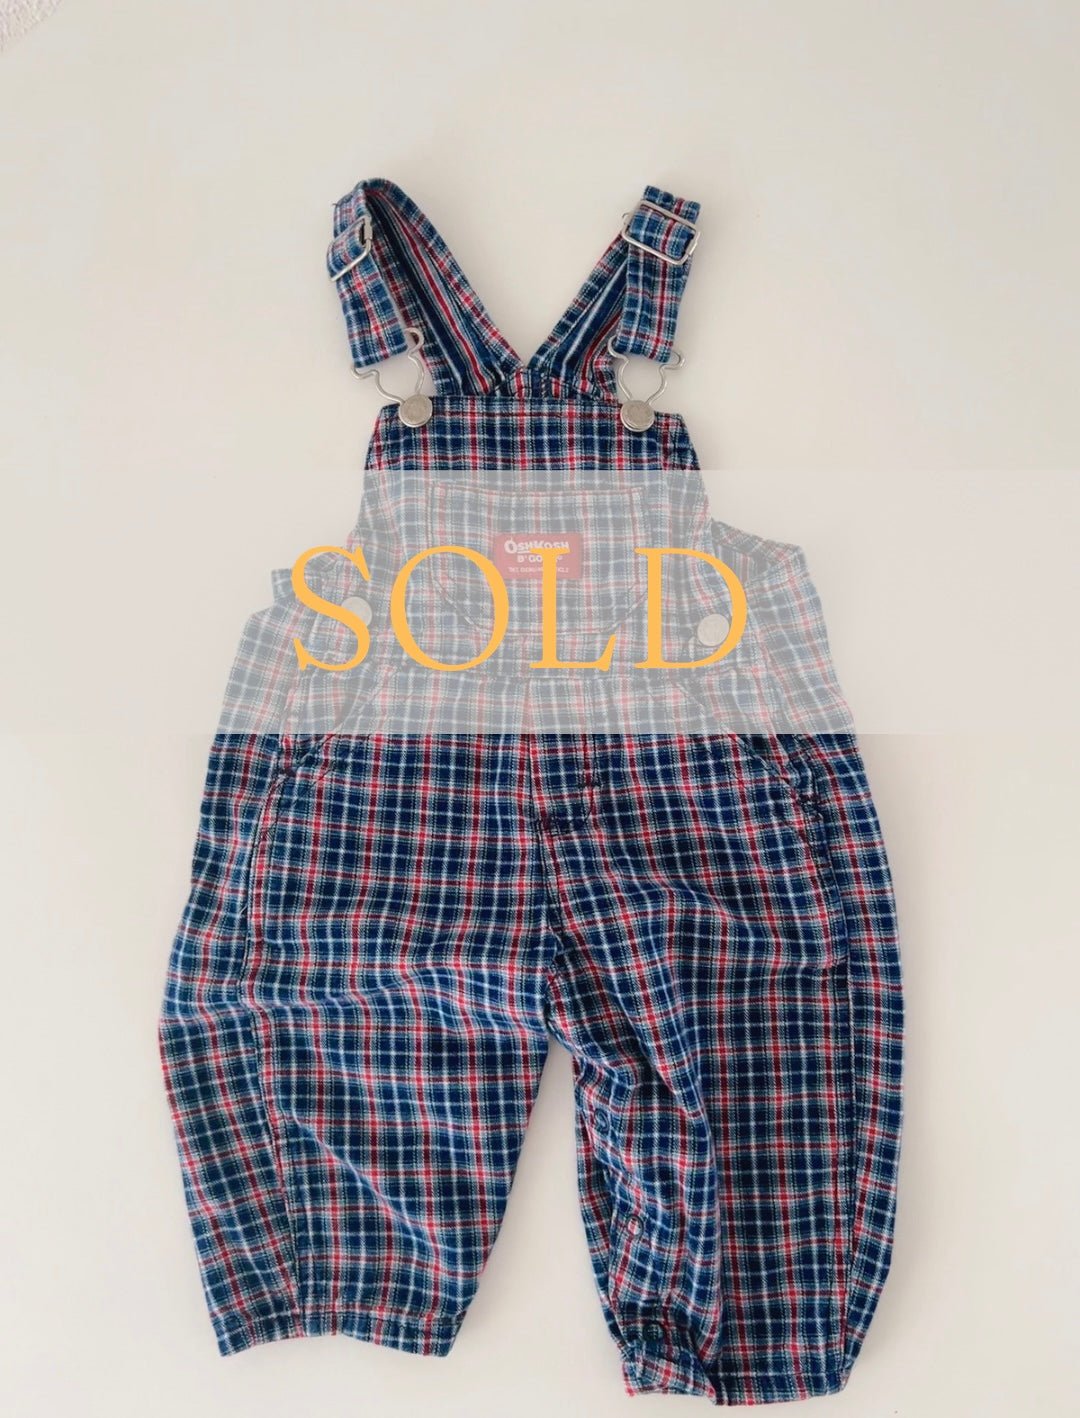 Oshkosh overall pre loved 12m+ - Marlow and Mae